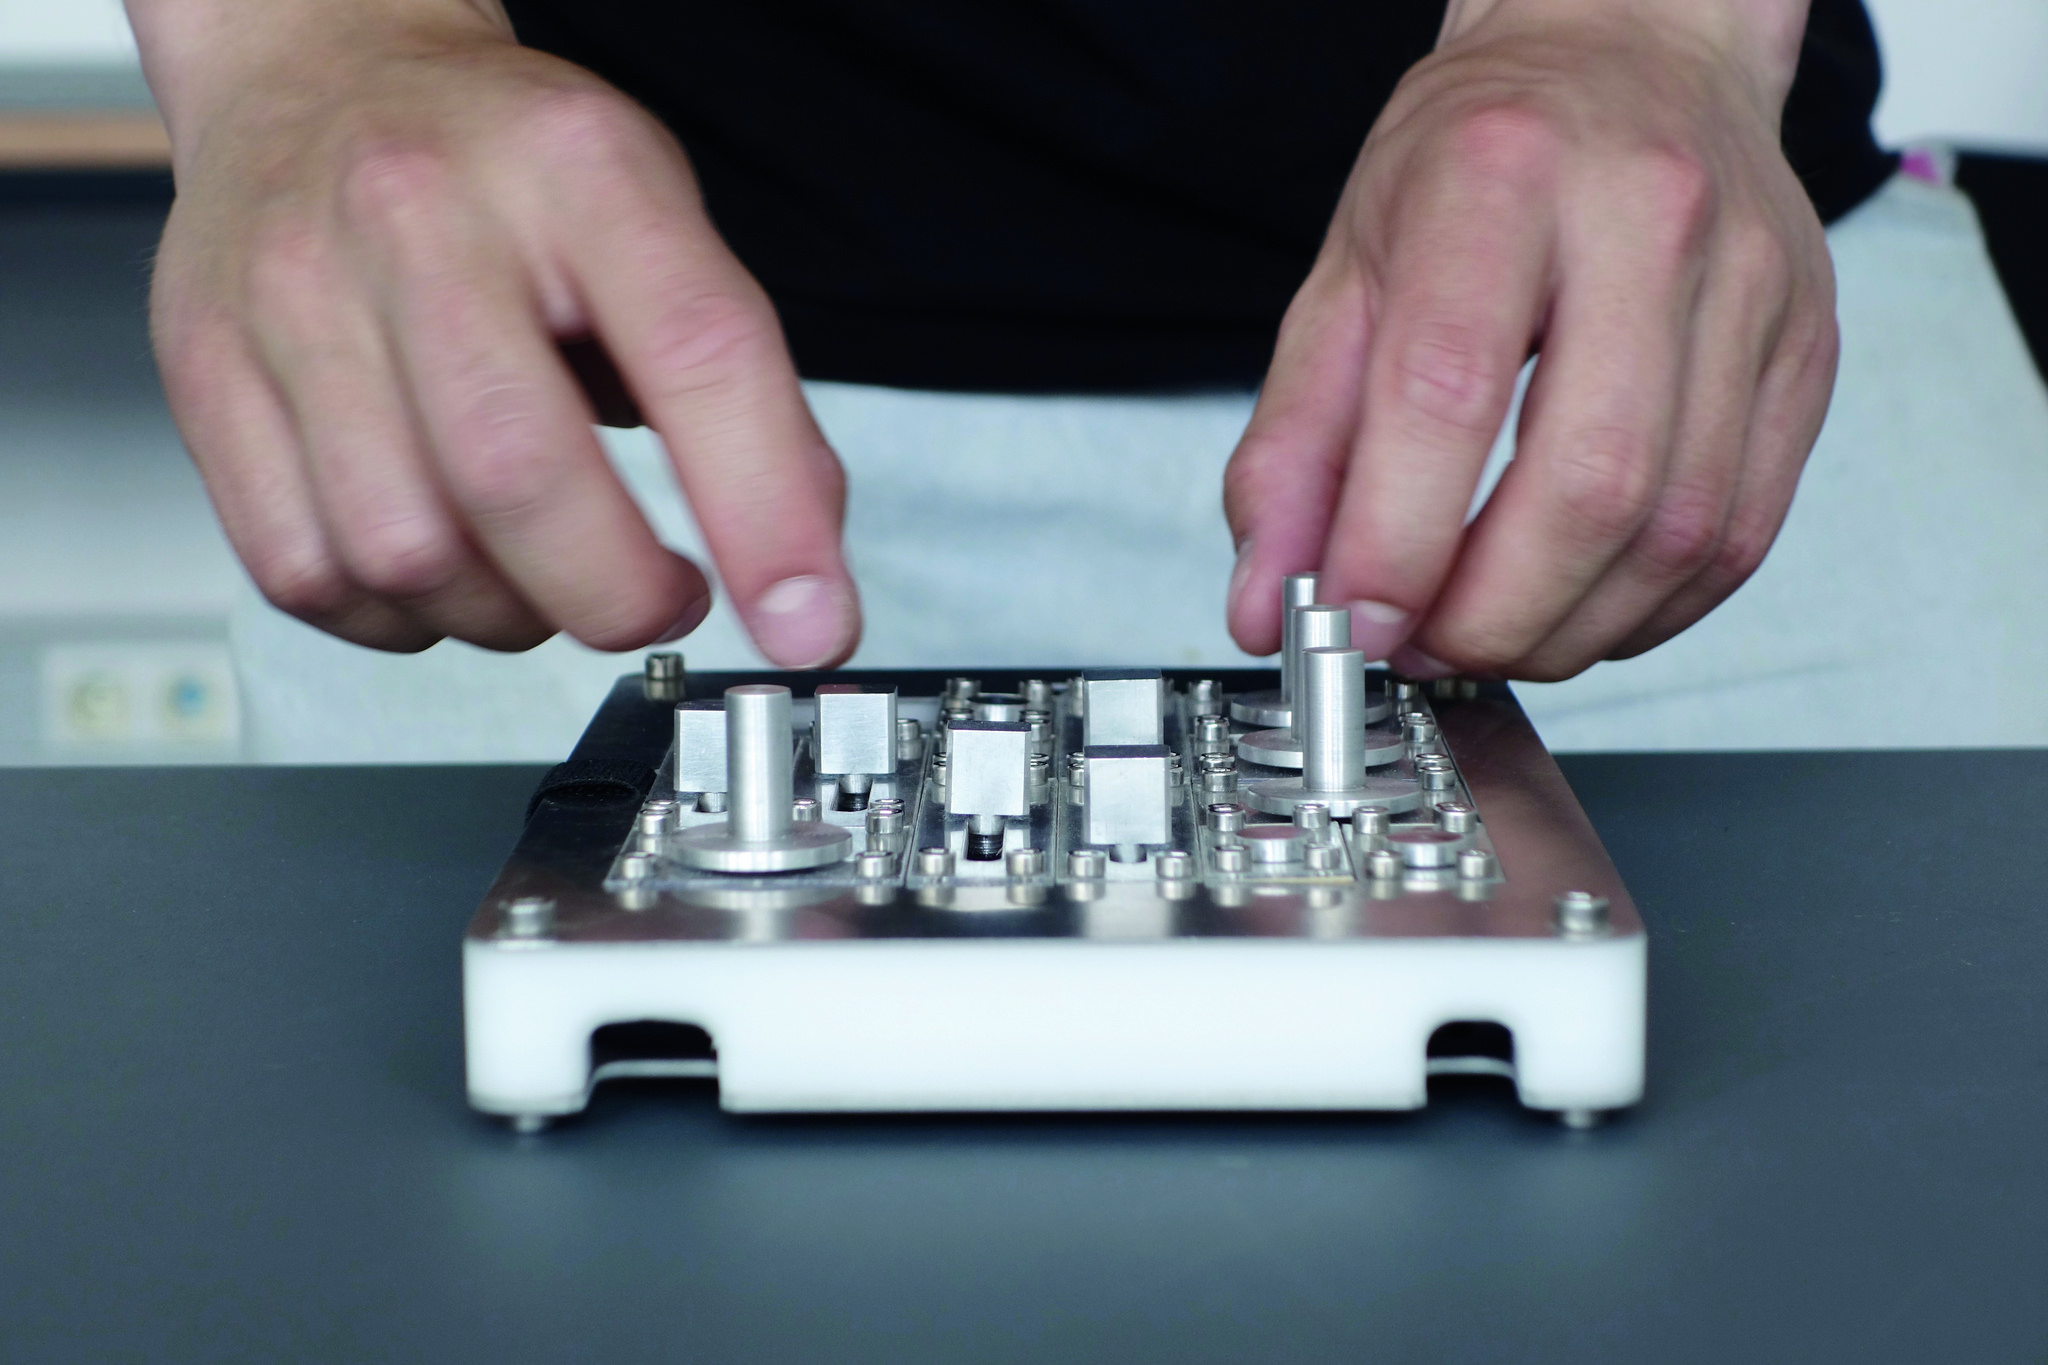 These Knobs And Sliders Turn An iPad Into A Custom Tactile Interface